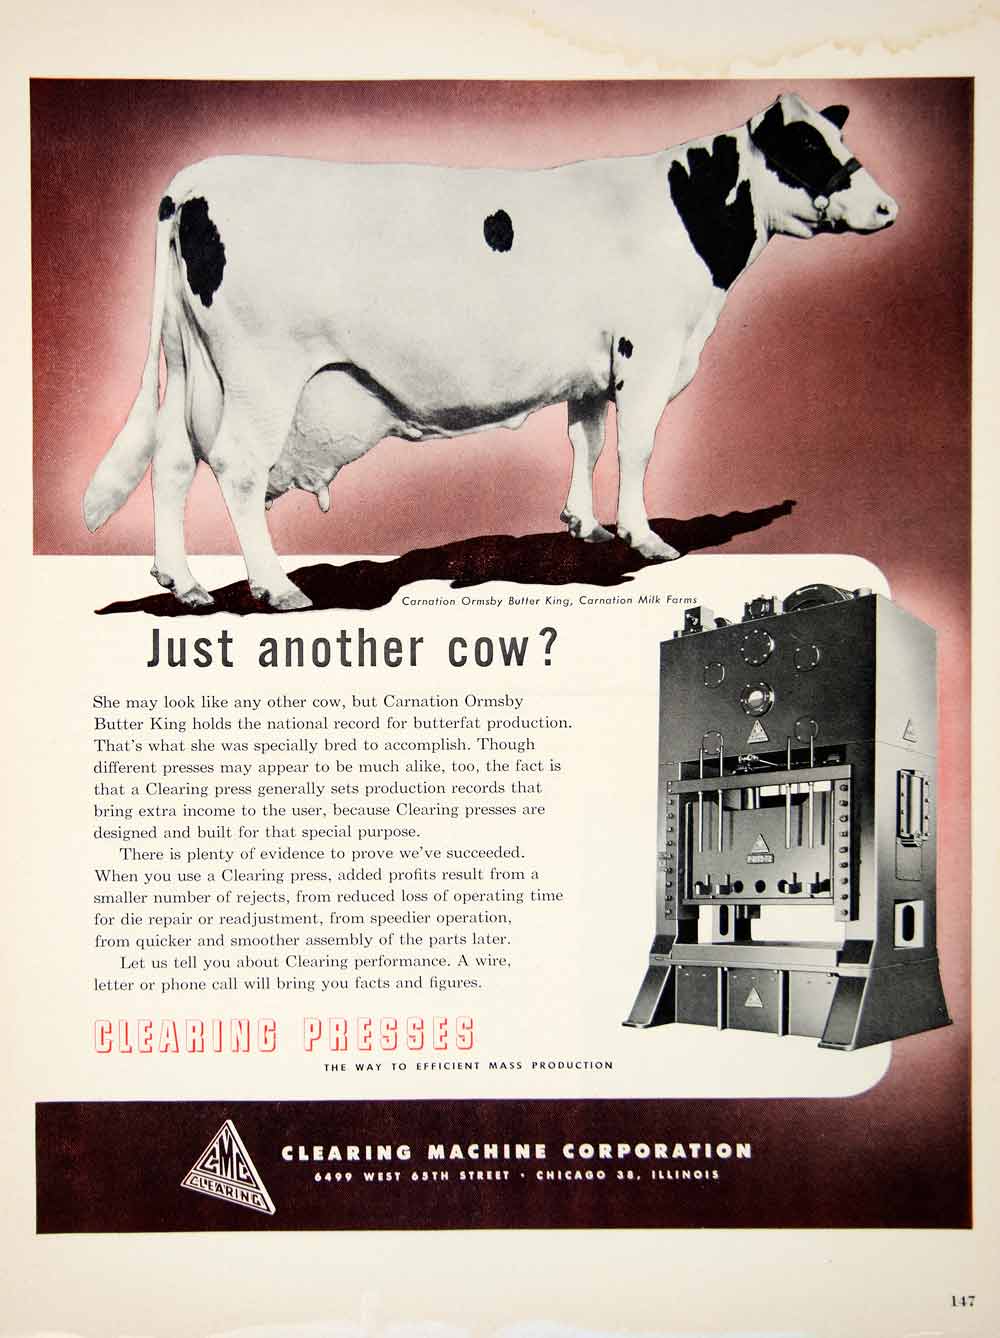 1950 Ad 6499 W 65th St Chicago Illinois Cow Clearing Press Dairy Production YFT5